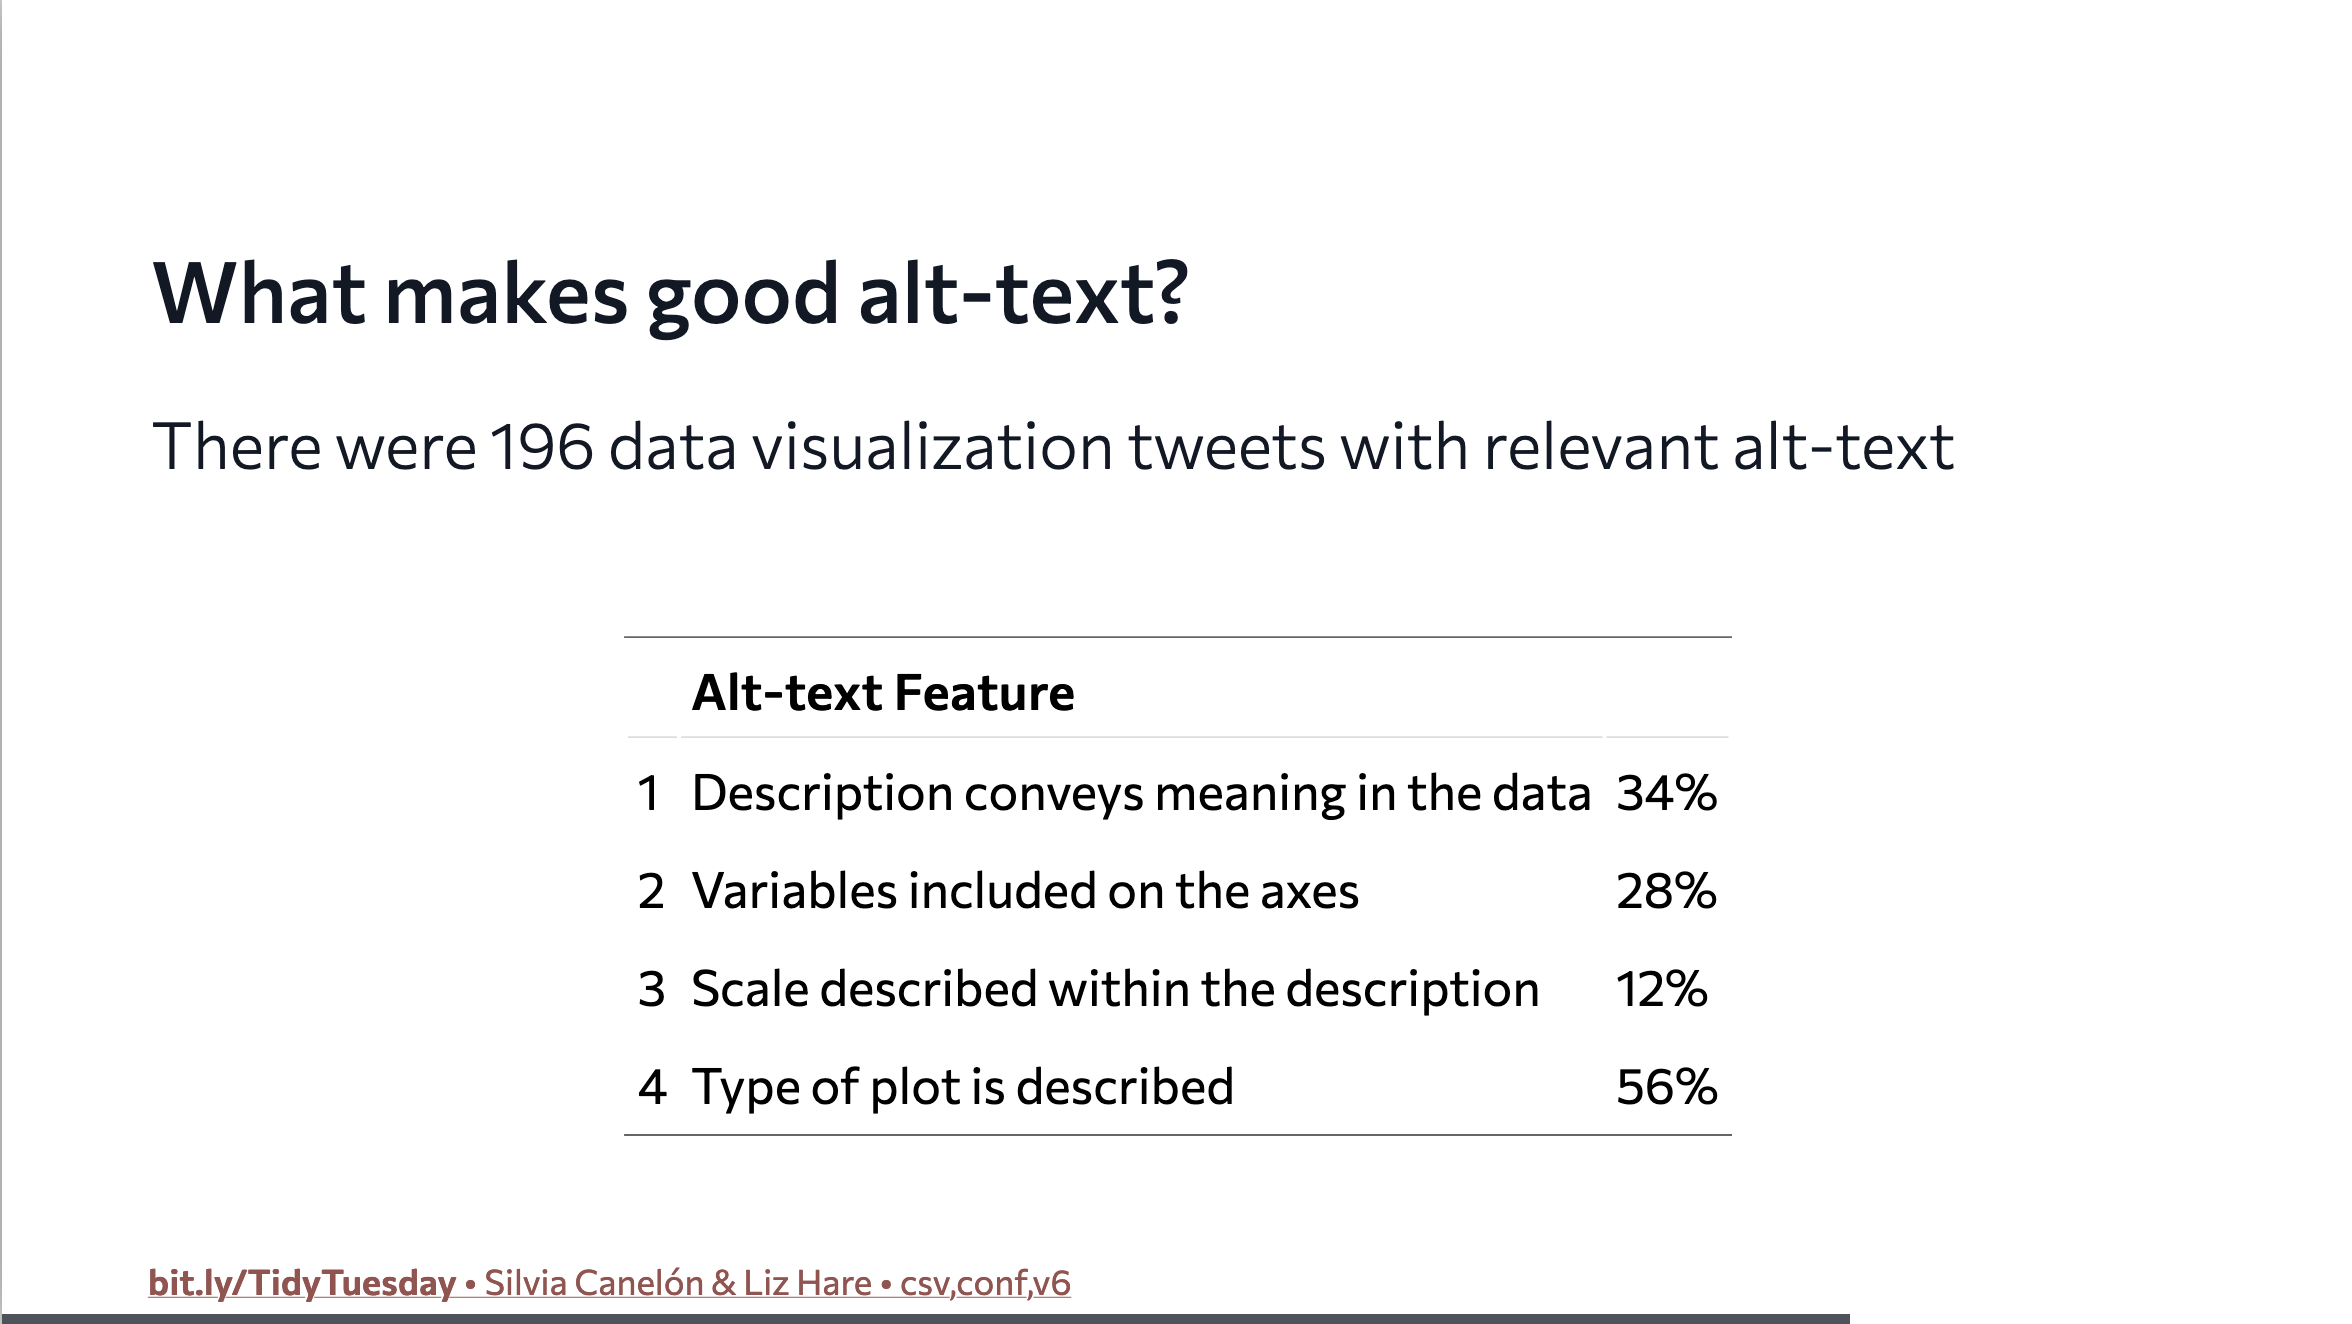 Effective alt includes a description that conveys meaning in the data, variables on the axes, scale described within the description, description of the type of plot. Direct link to slide: https://spcanelon.github.io/csvConf2021/slides/indexLH.html#11